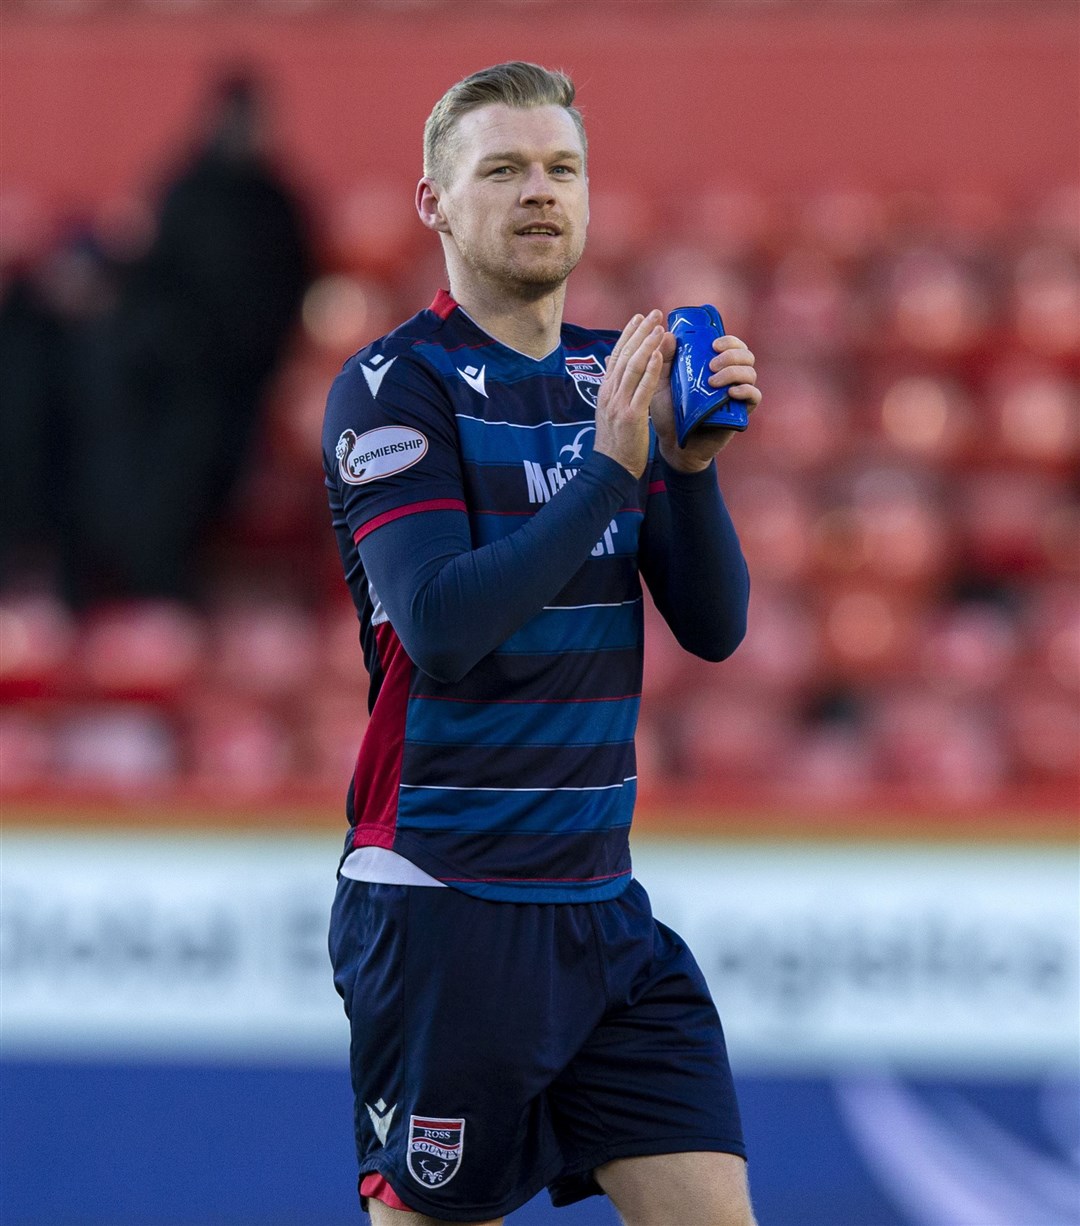 Picture - Ken Macpherson, Inverness. Aberdeen(1) v Ross County(2). 22.02.20. Ross County's Billy McKay celebrates at the end.